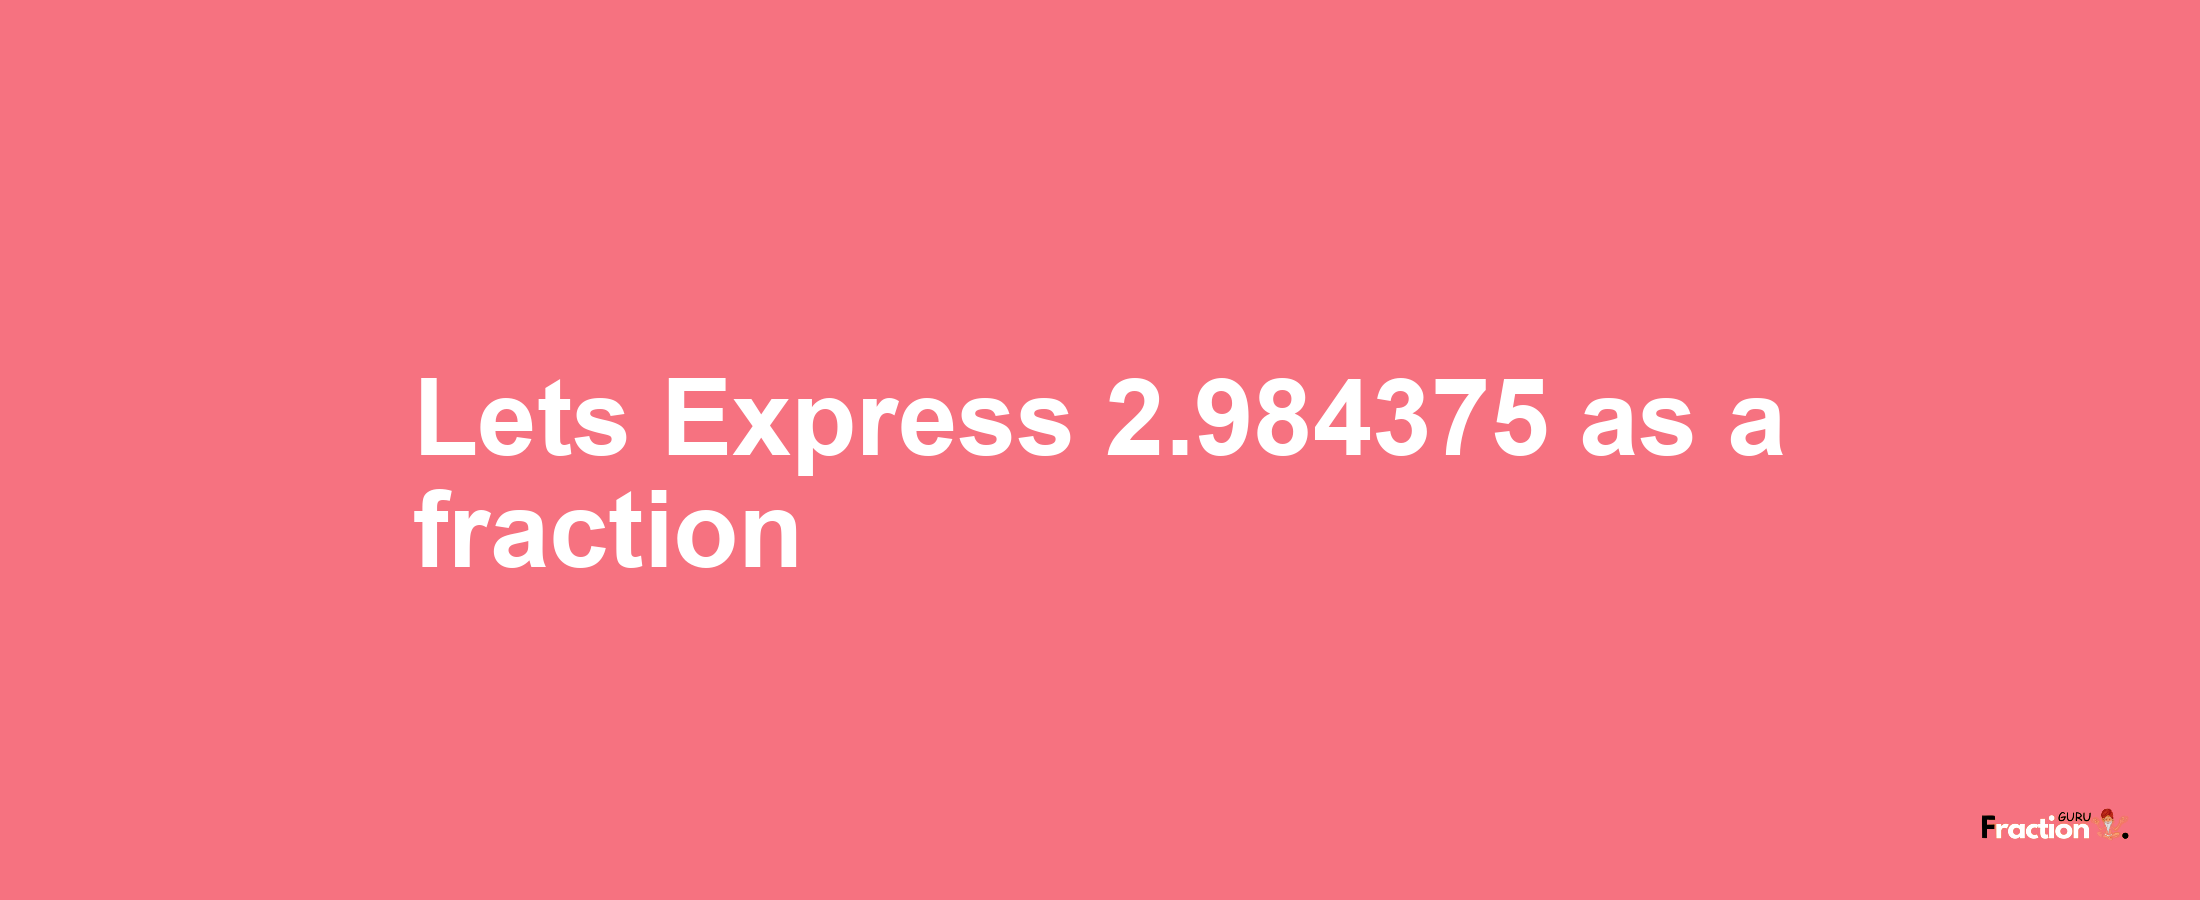 Lets Express 2.984375 as afraction